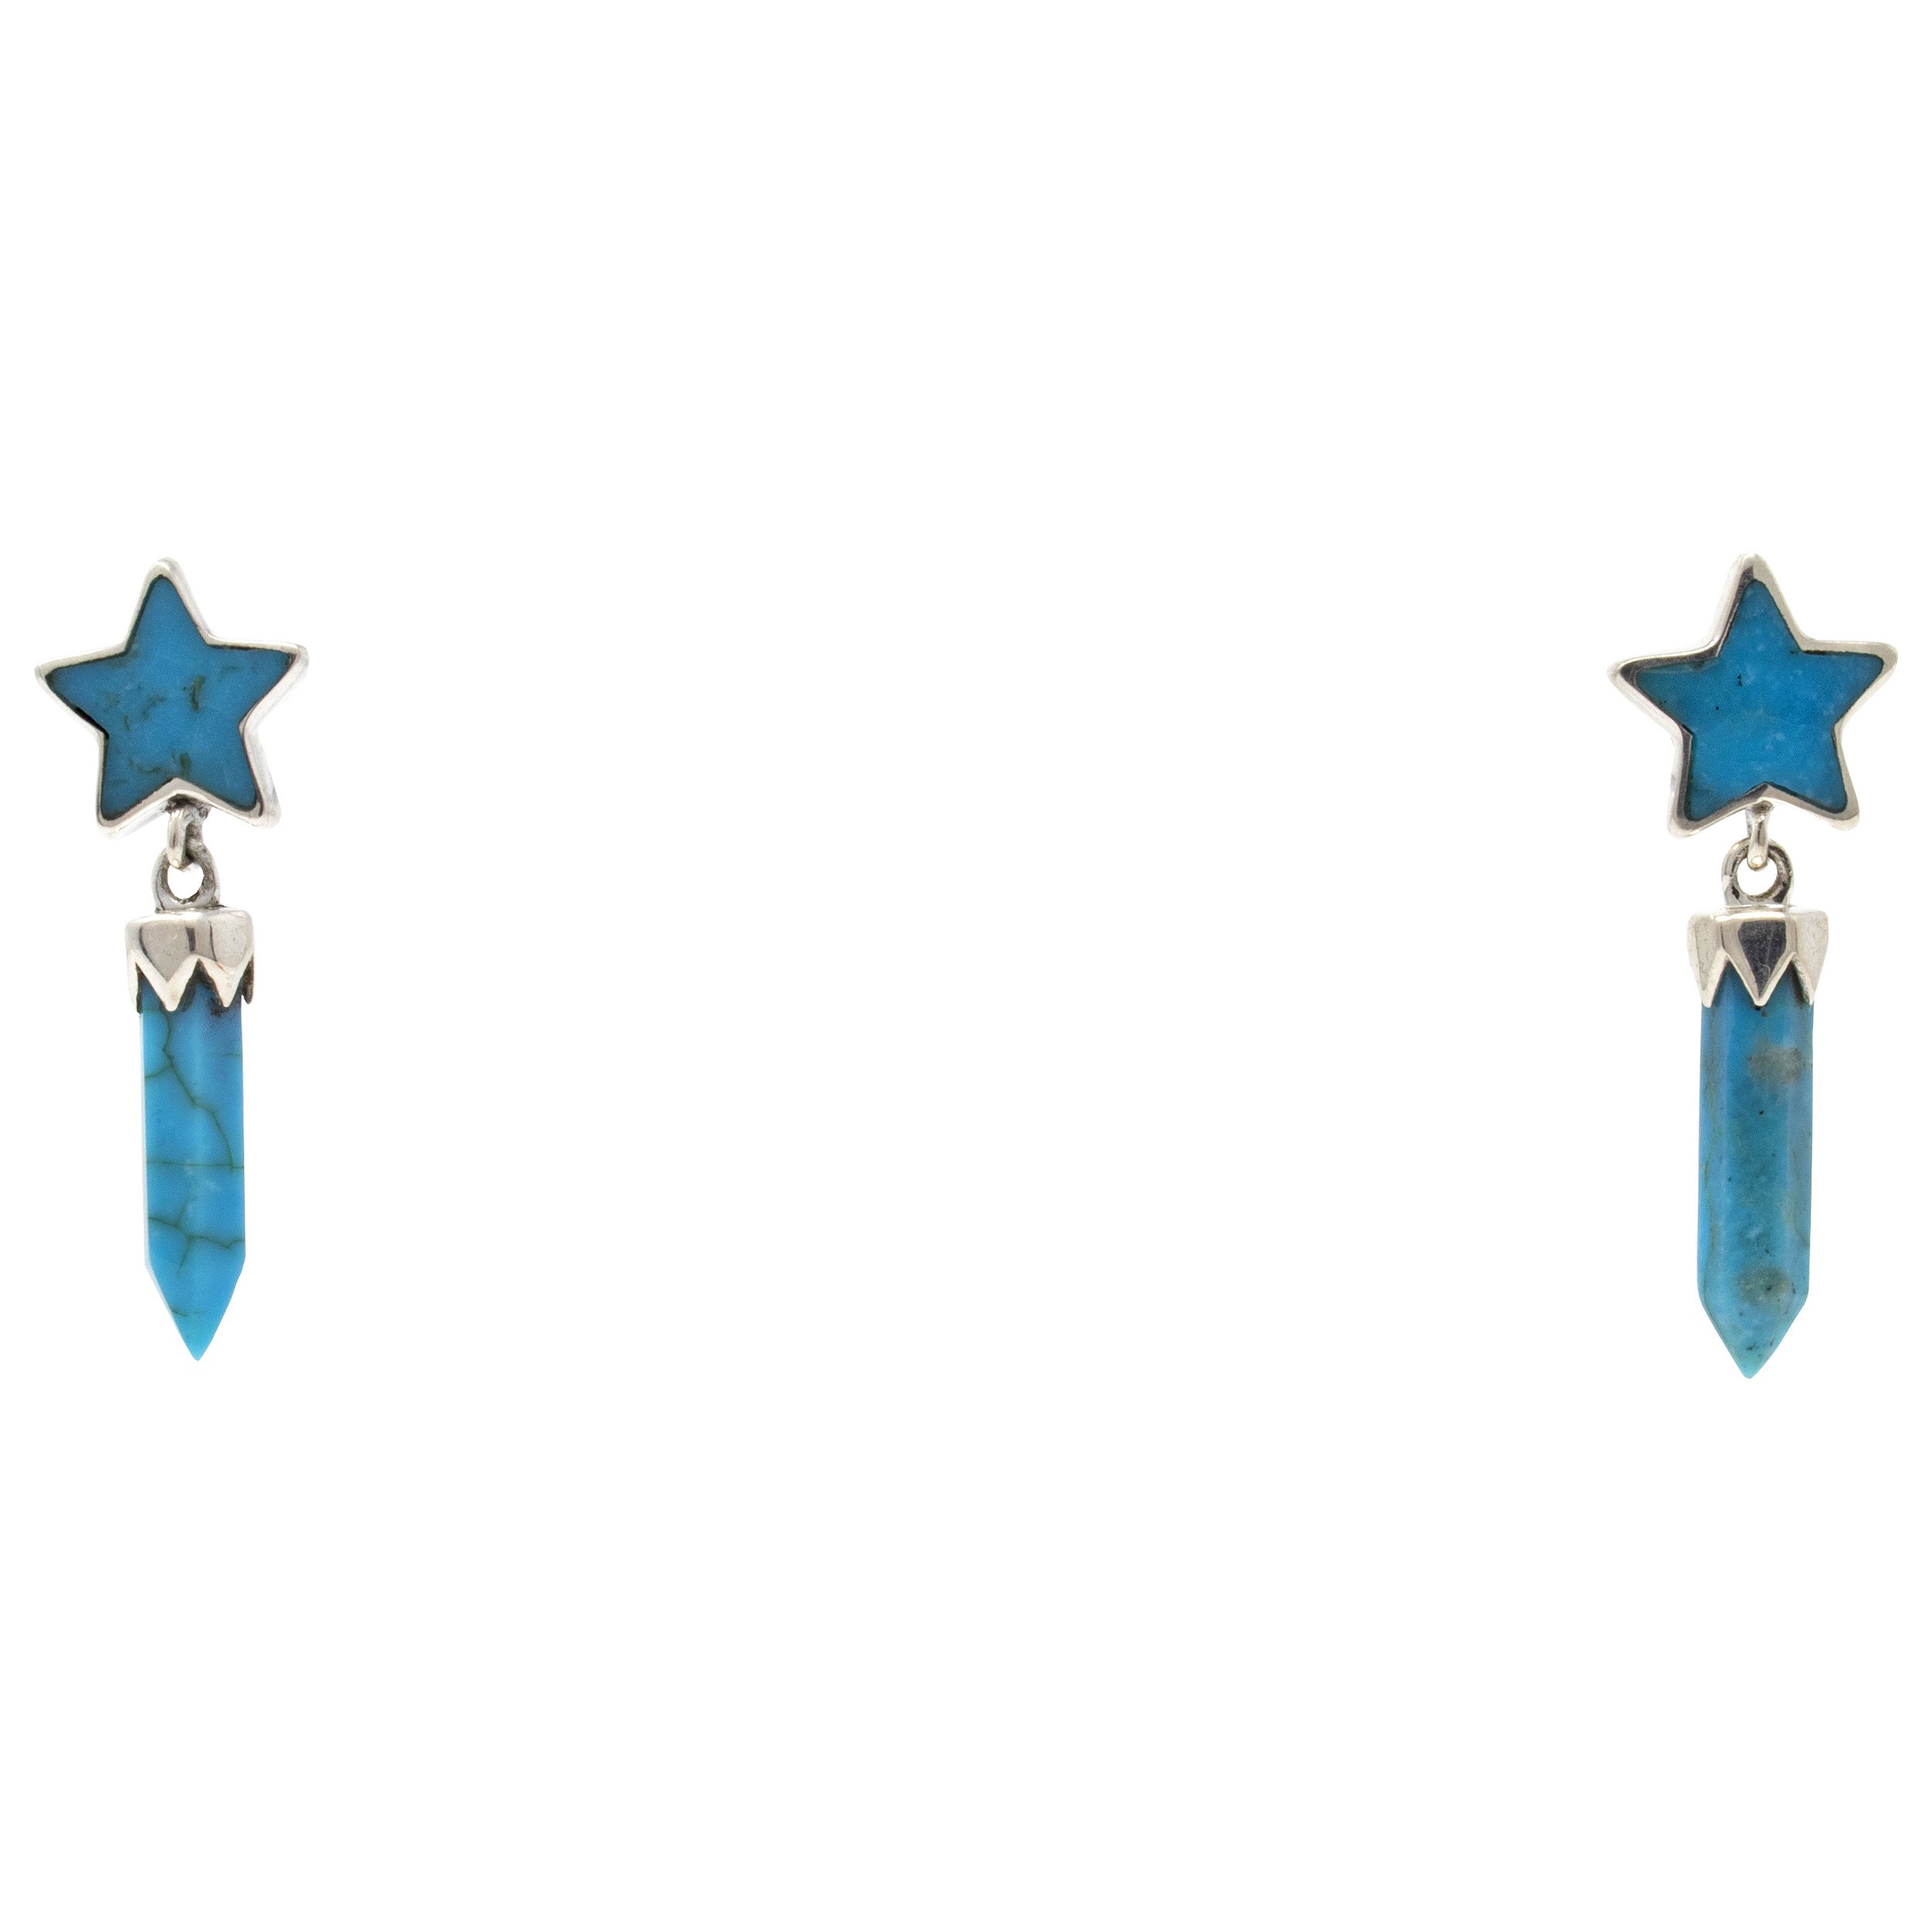 Turquoise Dangle Earrings On-post - Terminated Point With 5 Sided Star On Top With Silver Bezel